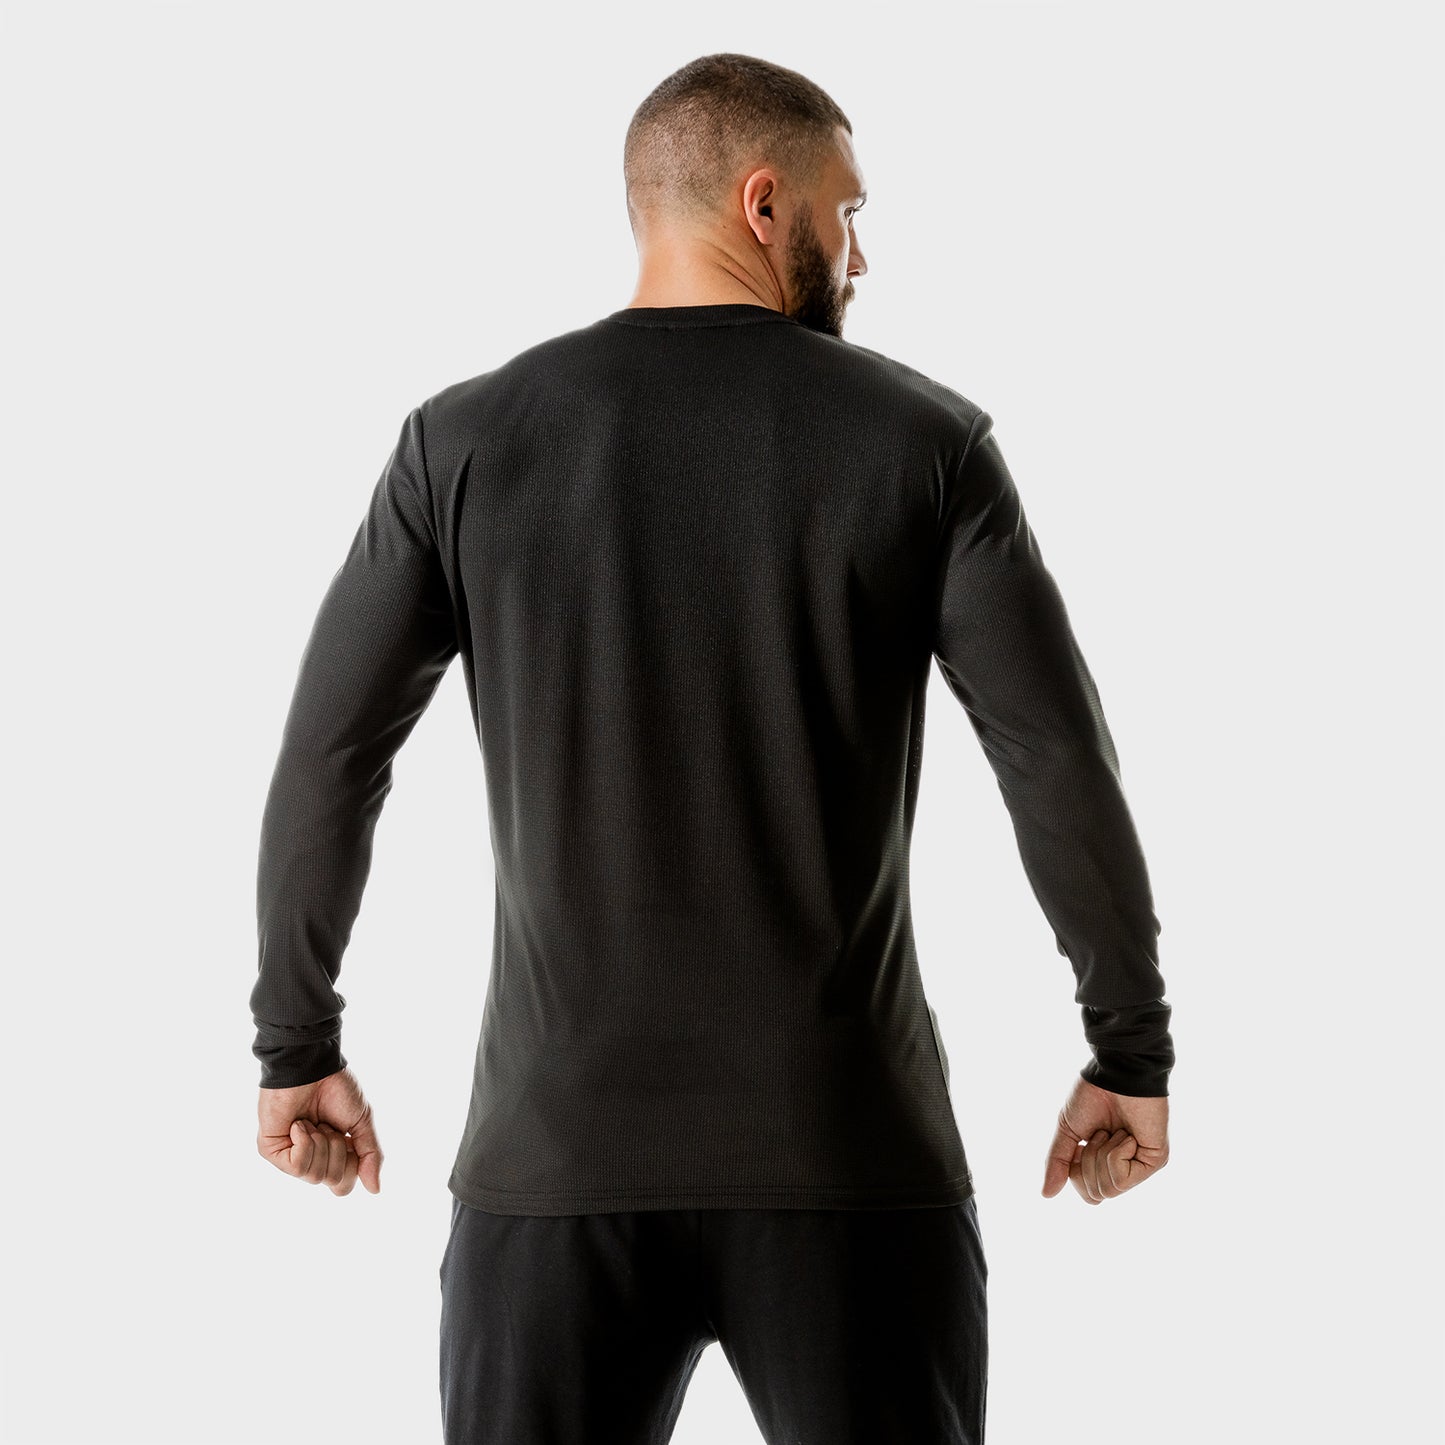 squatwolf-gym-wear-lab360-performance-crew-top-black-running-tops-for-men